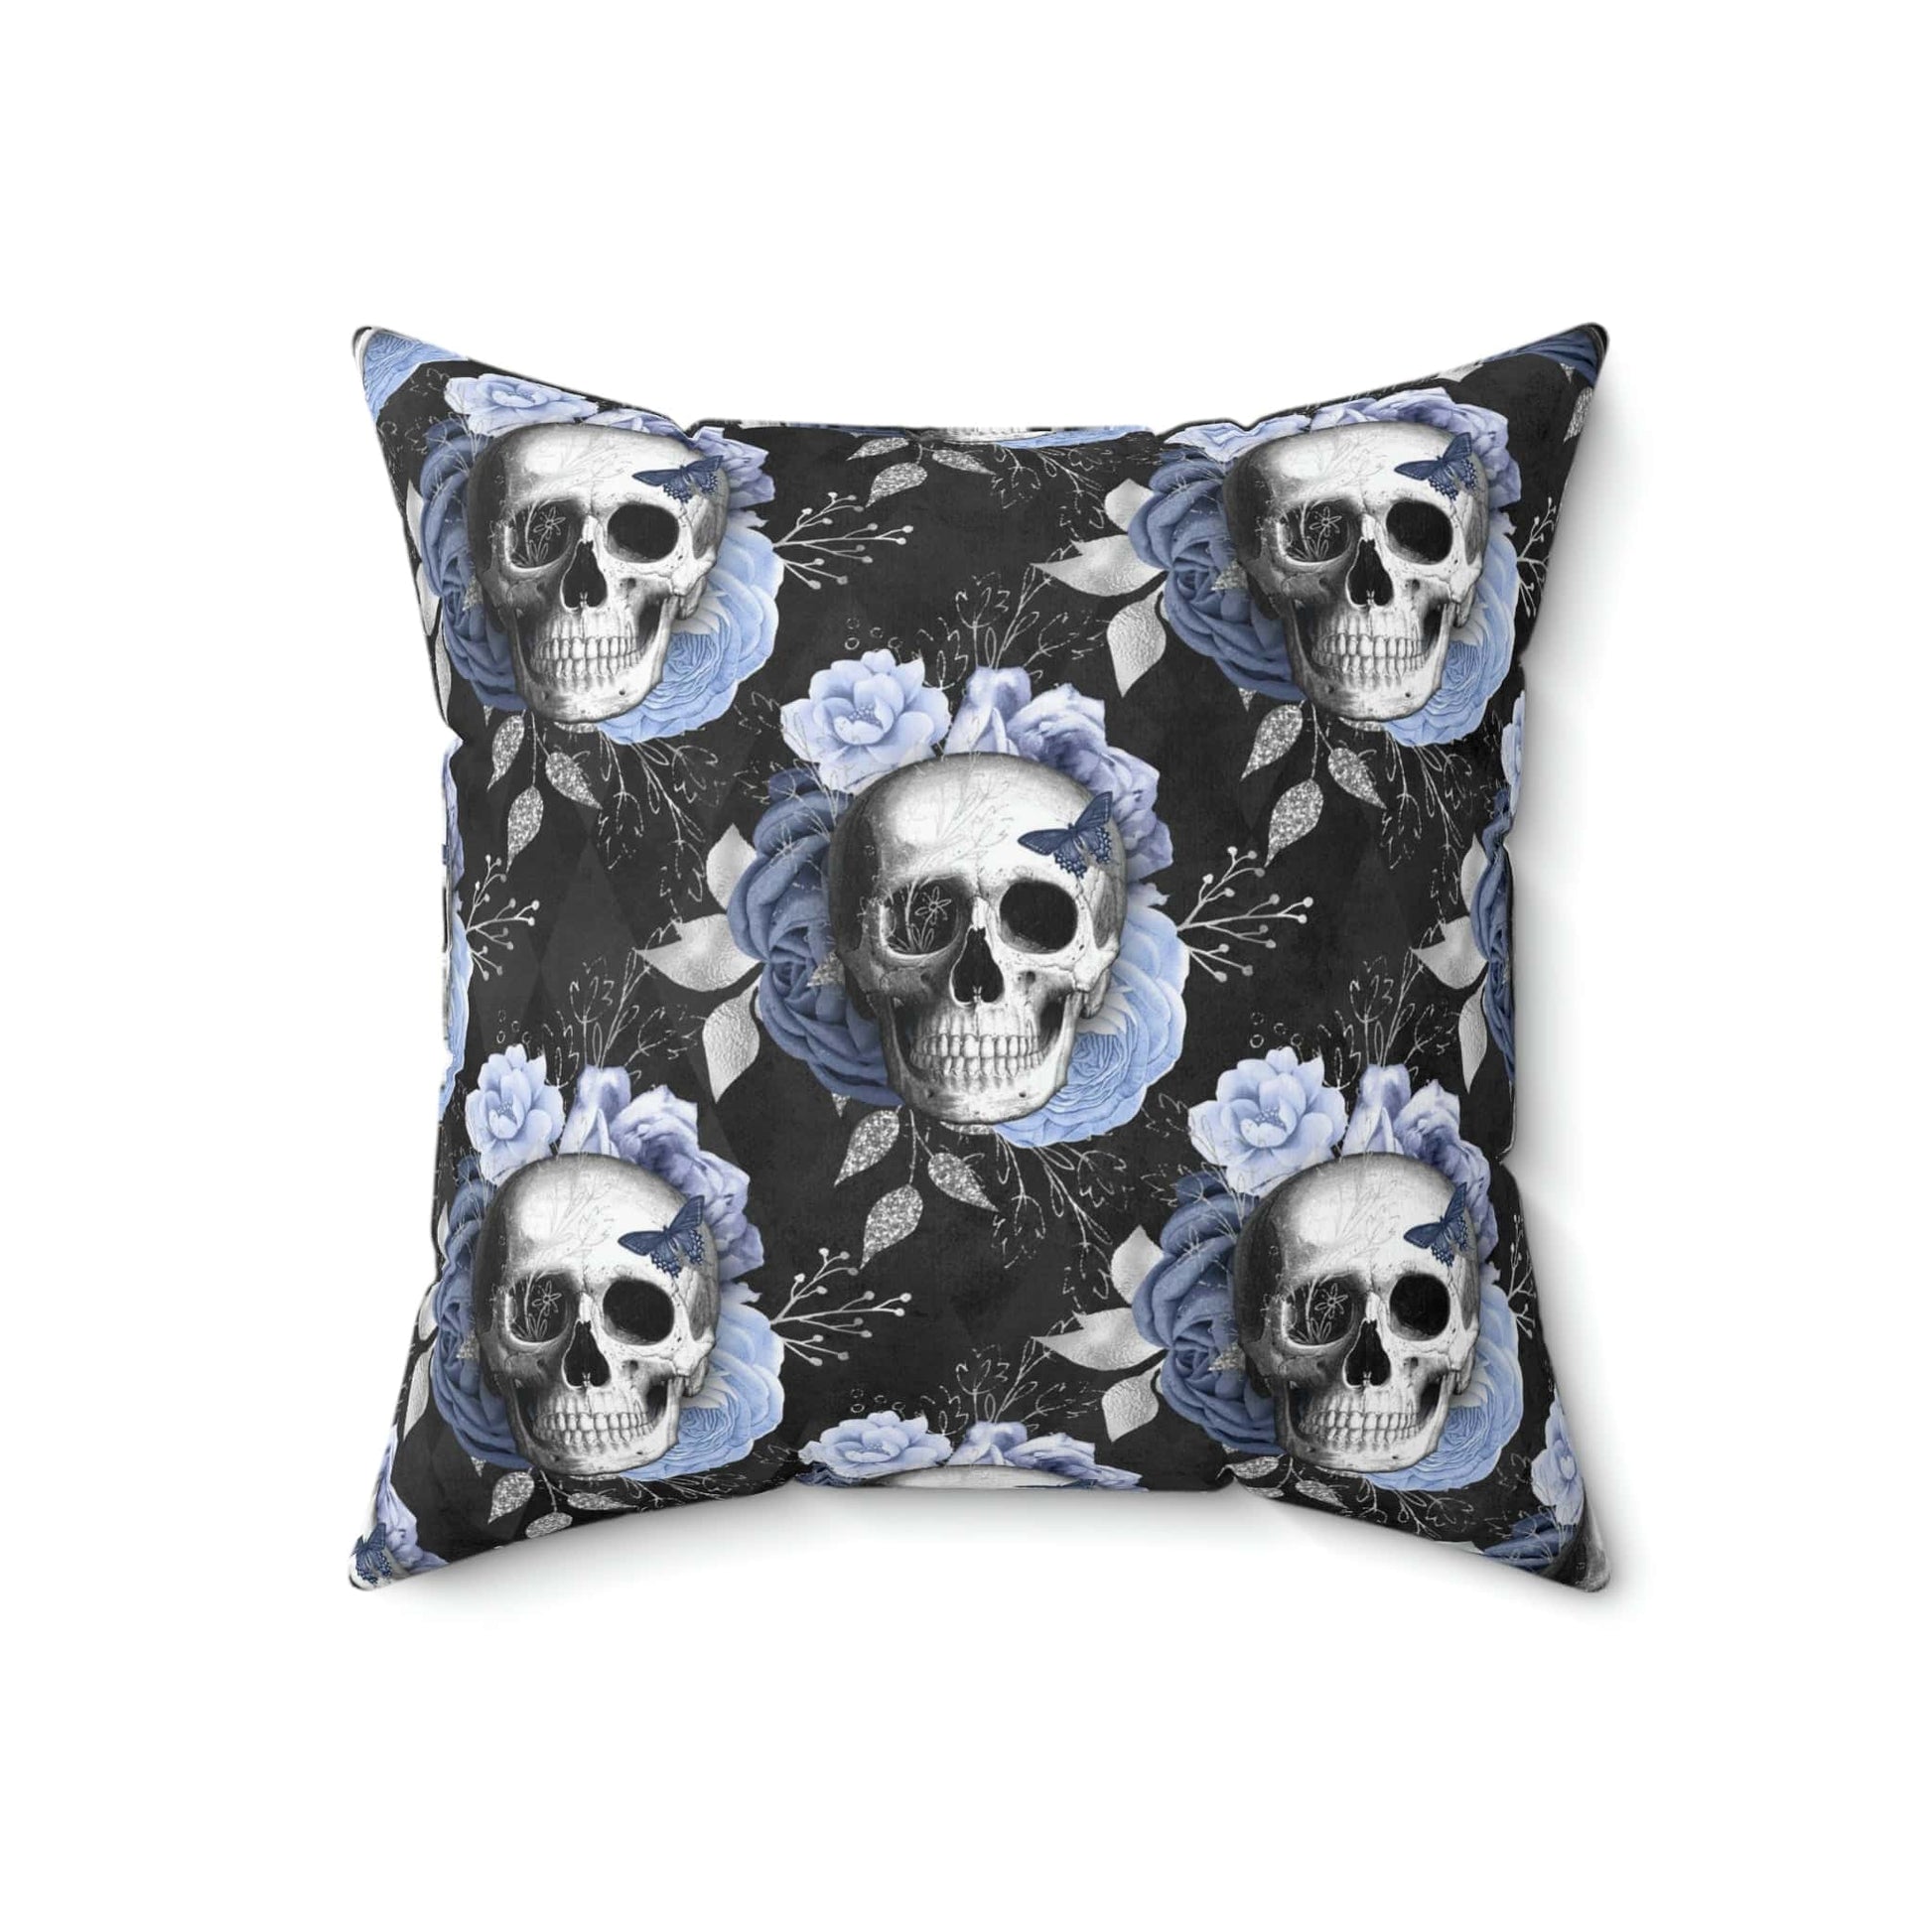 Kate McEnroe New York Floral Skull Square Pillow Cover Throw Pillow Covers